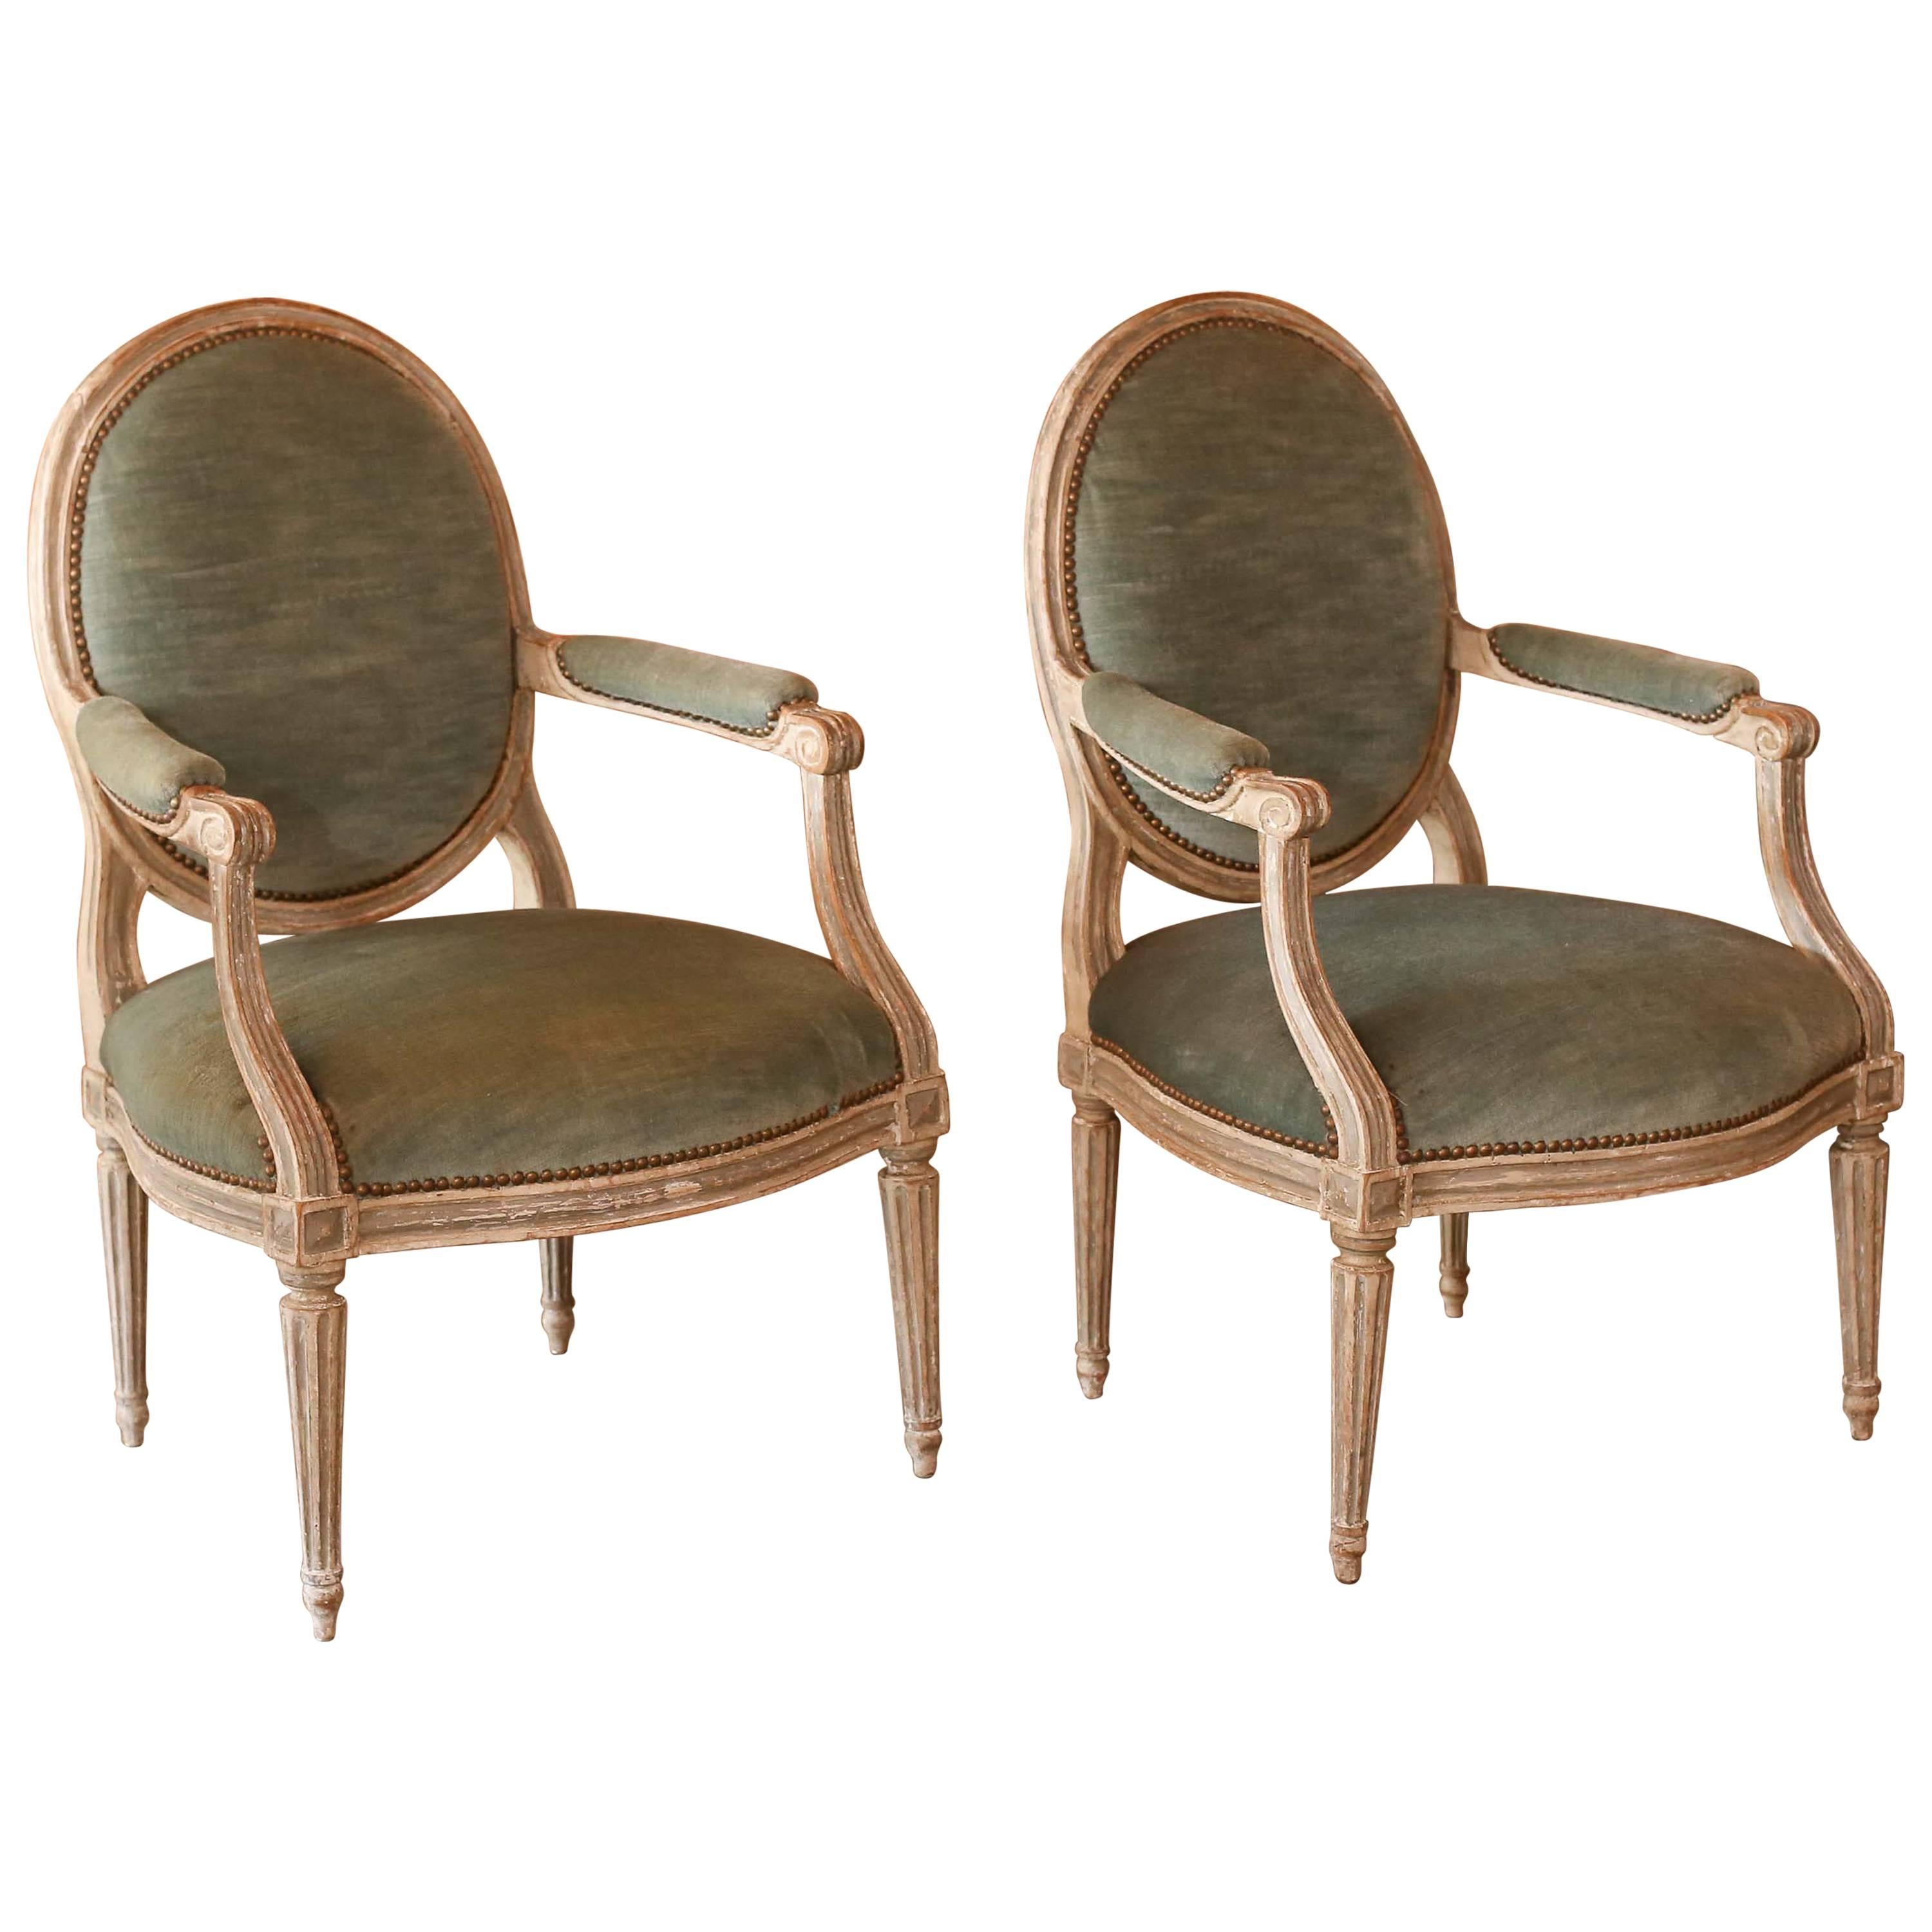 French 18th Century Louis XVI Painted Armchairs with Velvet Upholstery Stamped